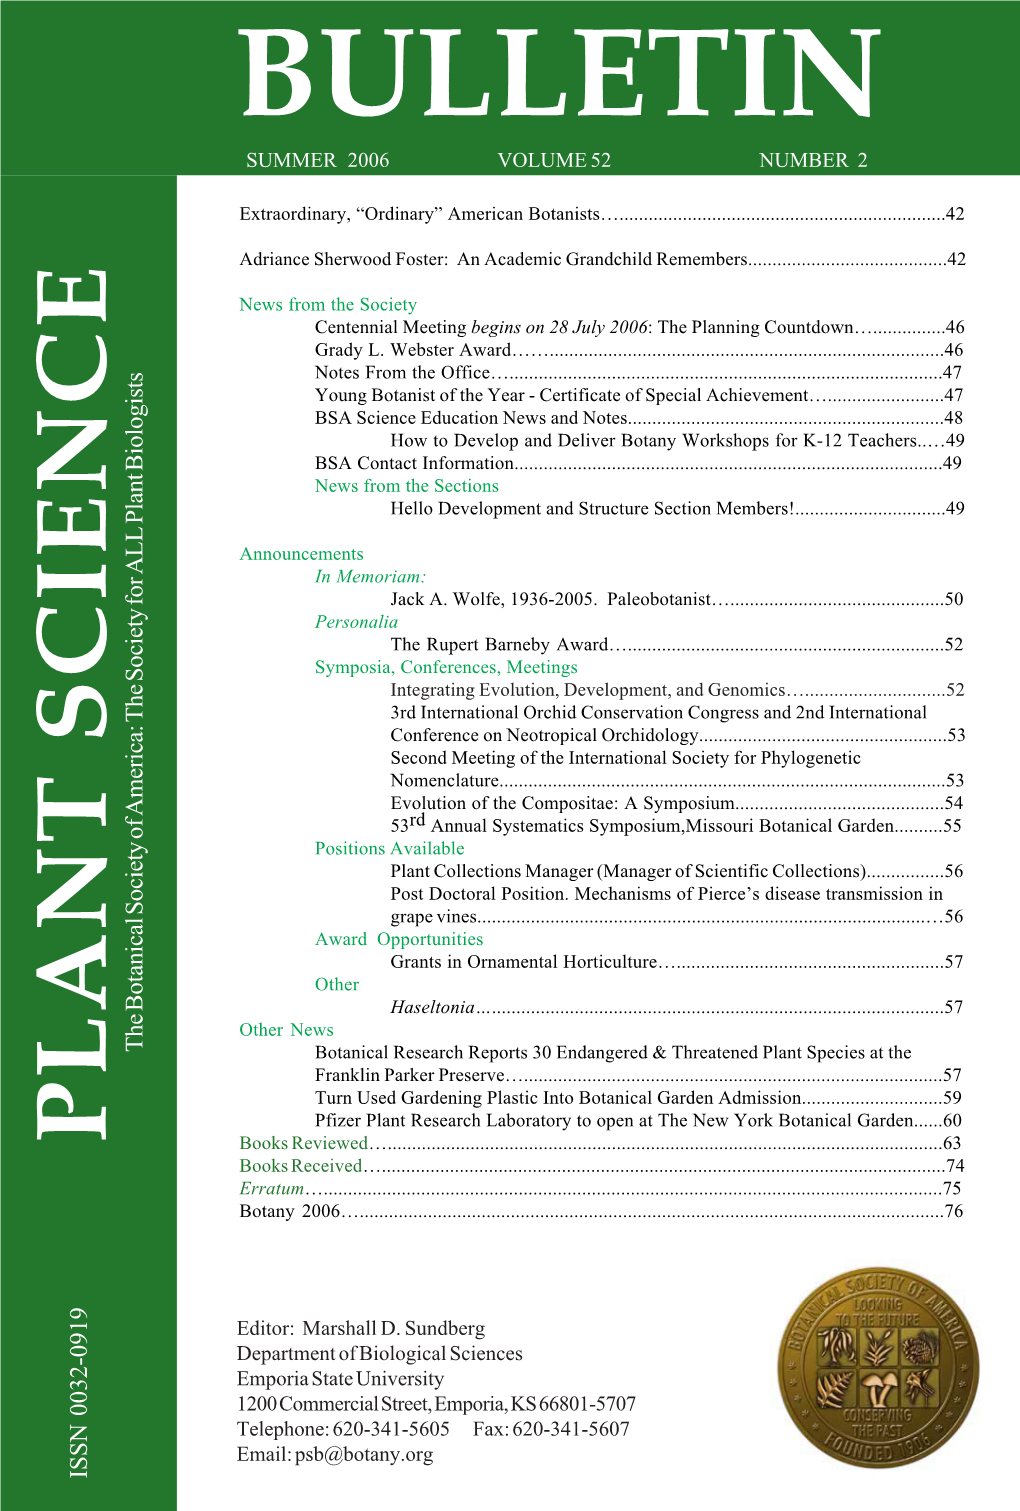 PLANT SCIENCE Books Reviewed…